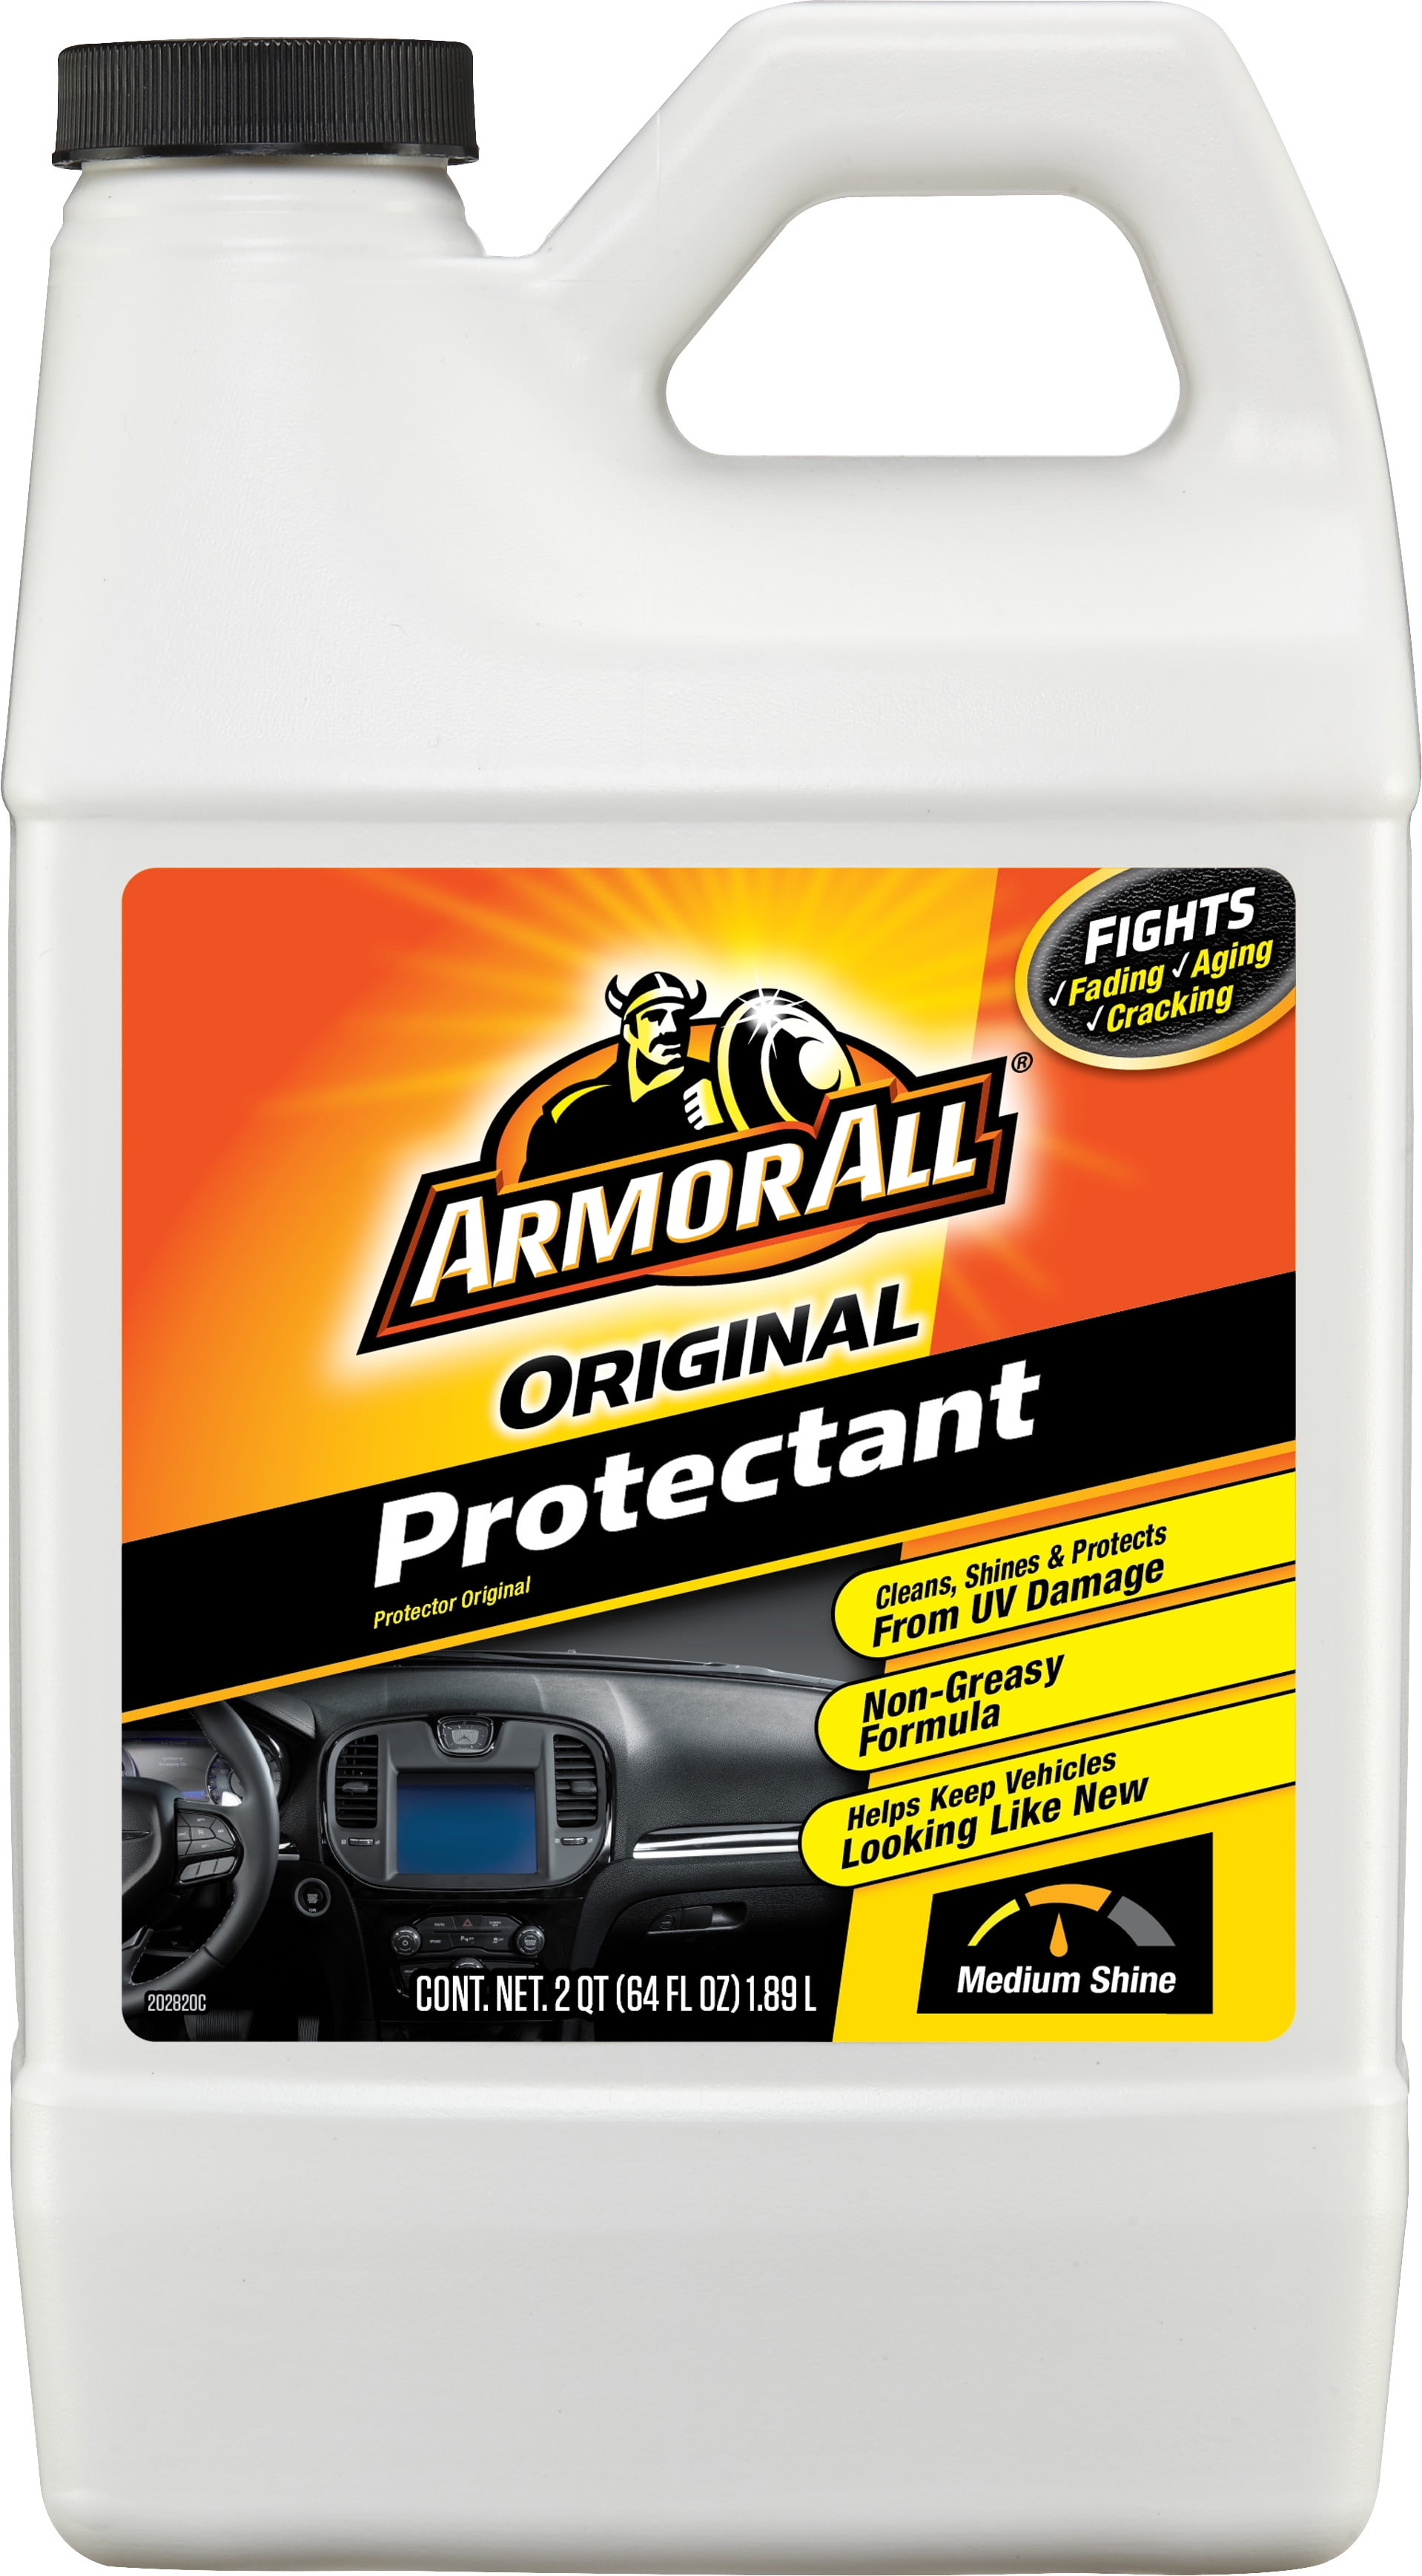 Armor All's new car care products promises easy professional